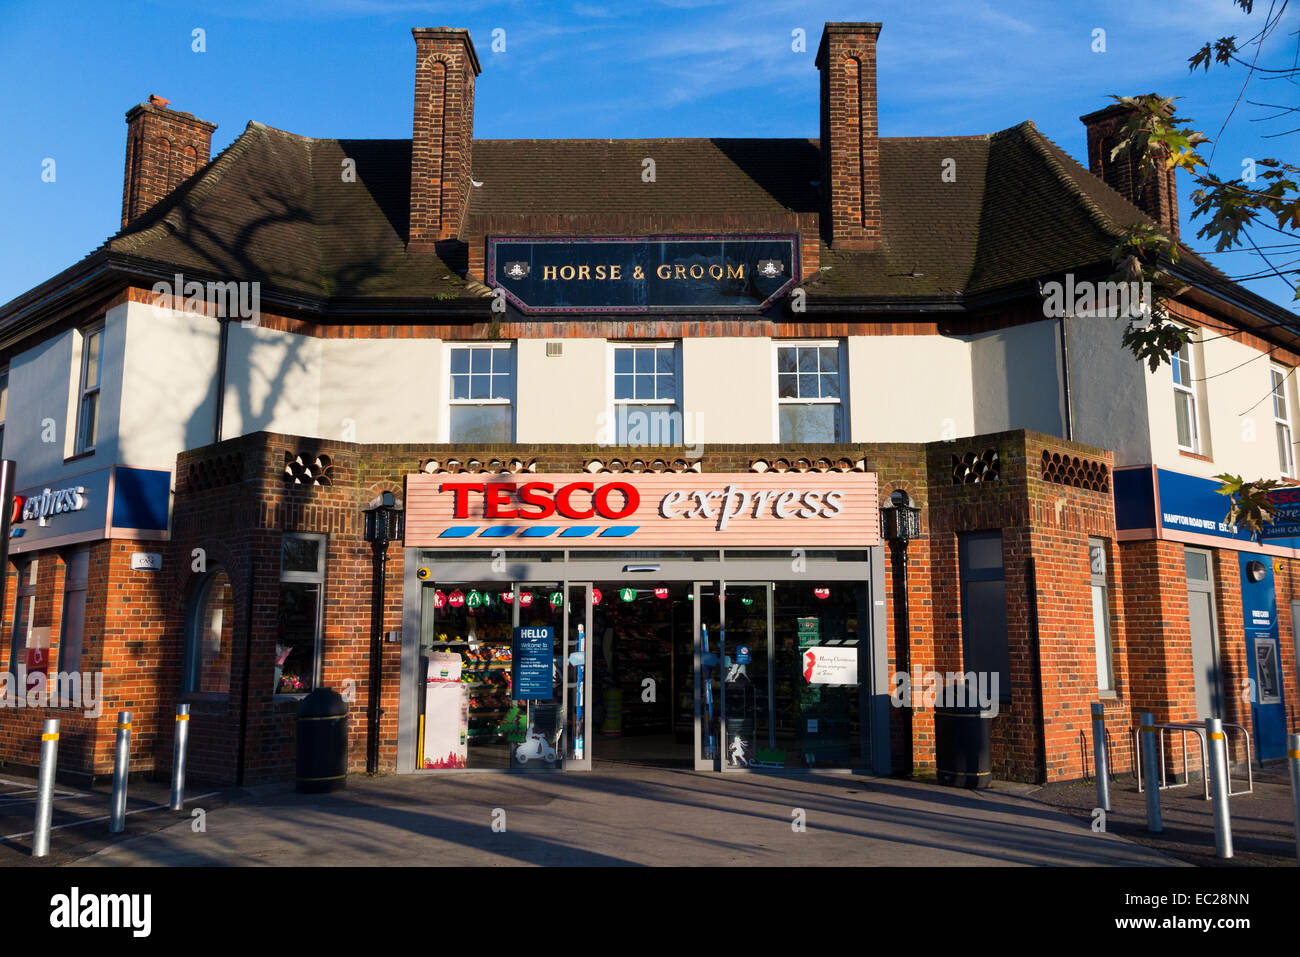 Tesco Express supermarket: pub / public house converted from Horse and Groom into convenience store / metro suoer market. UK. Stock Photo